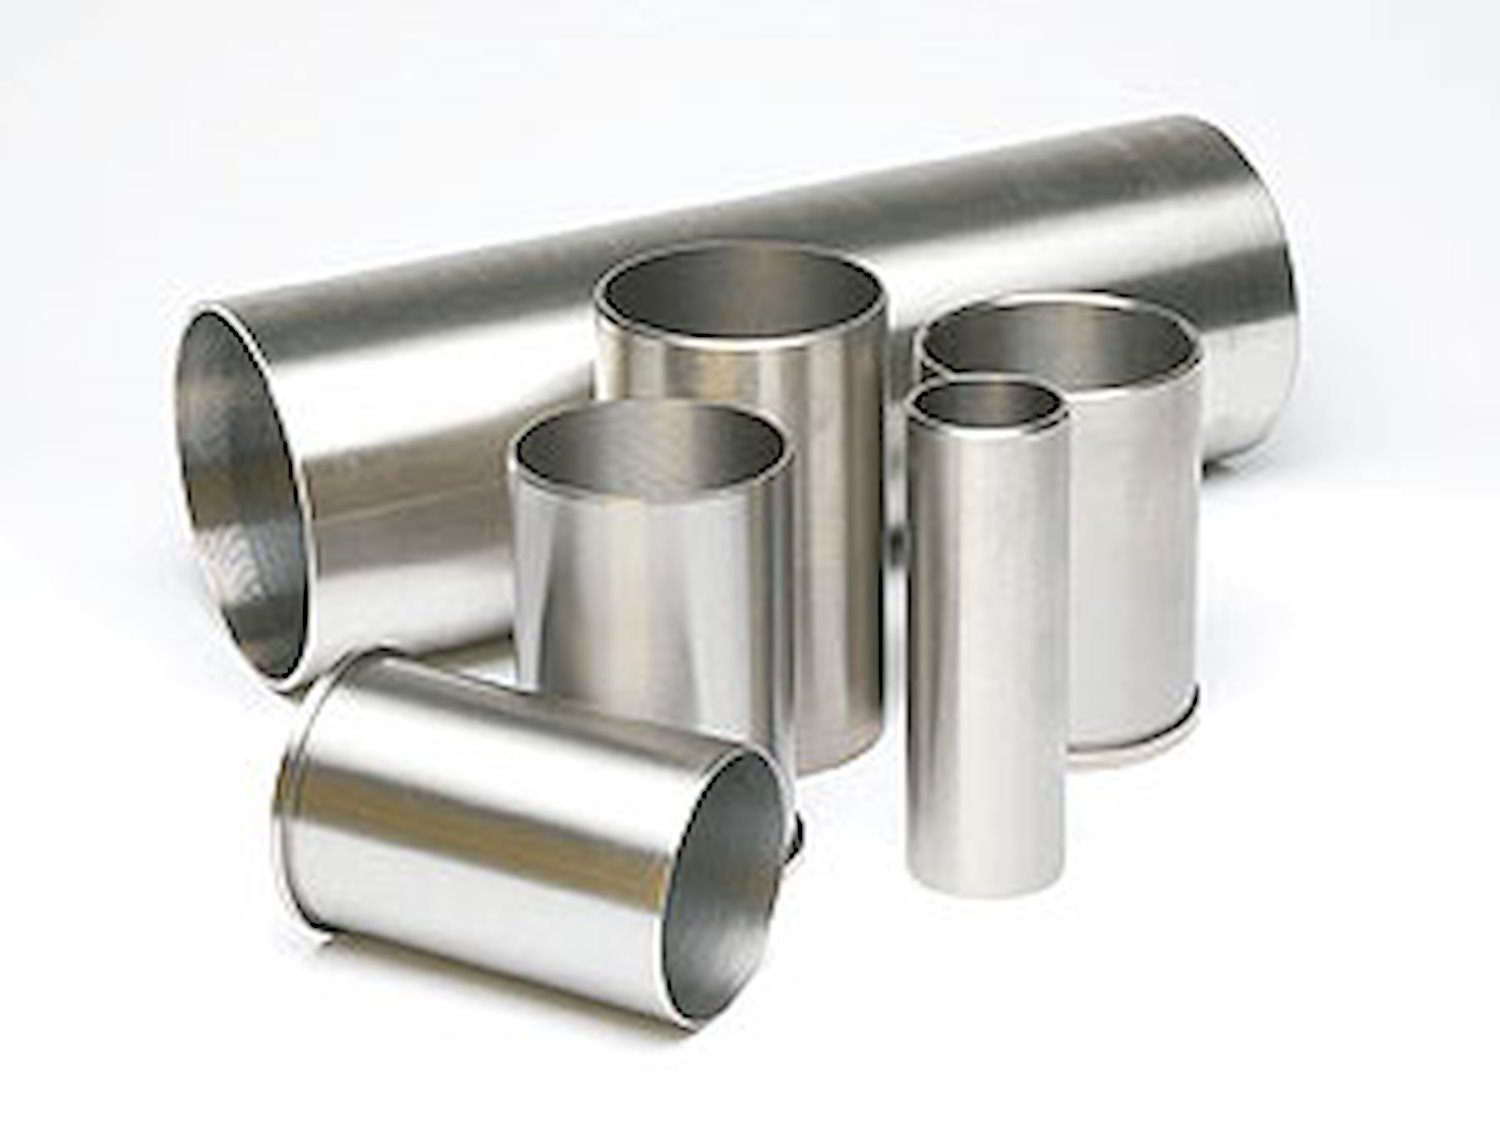 Cylinder Sleeve Bore: 4.1250" Length: 6-3/4" Wall Thickness: 1/8"